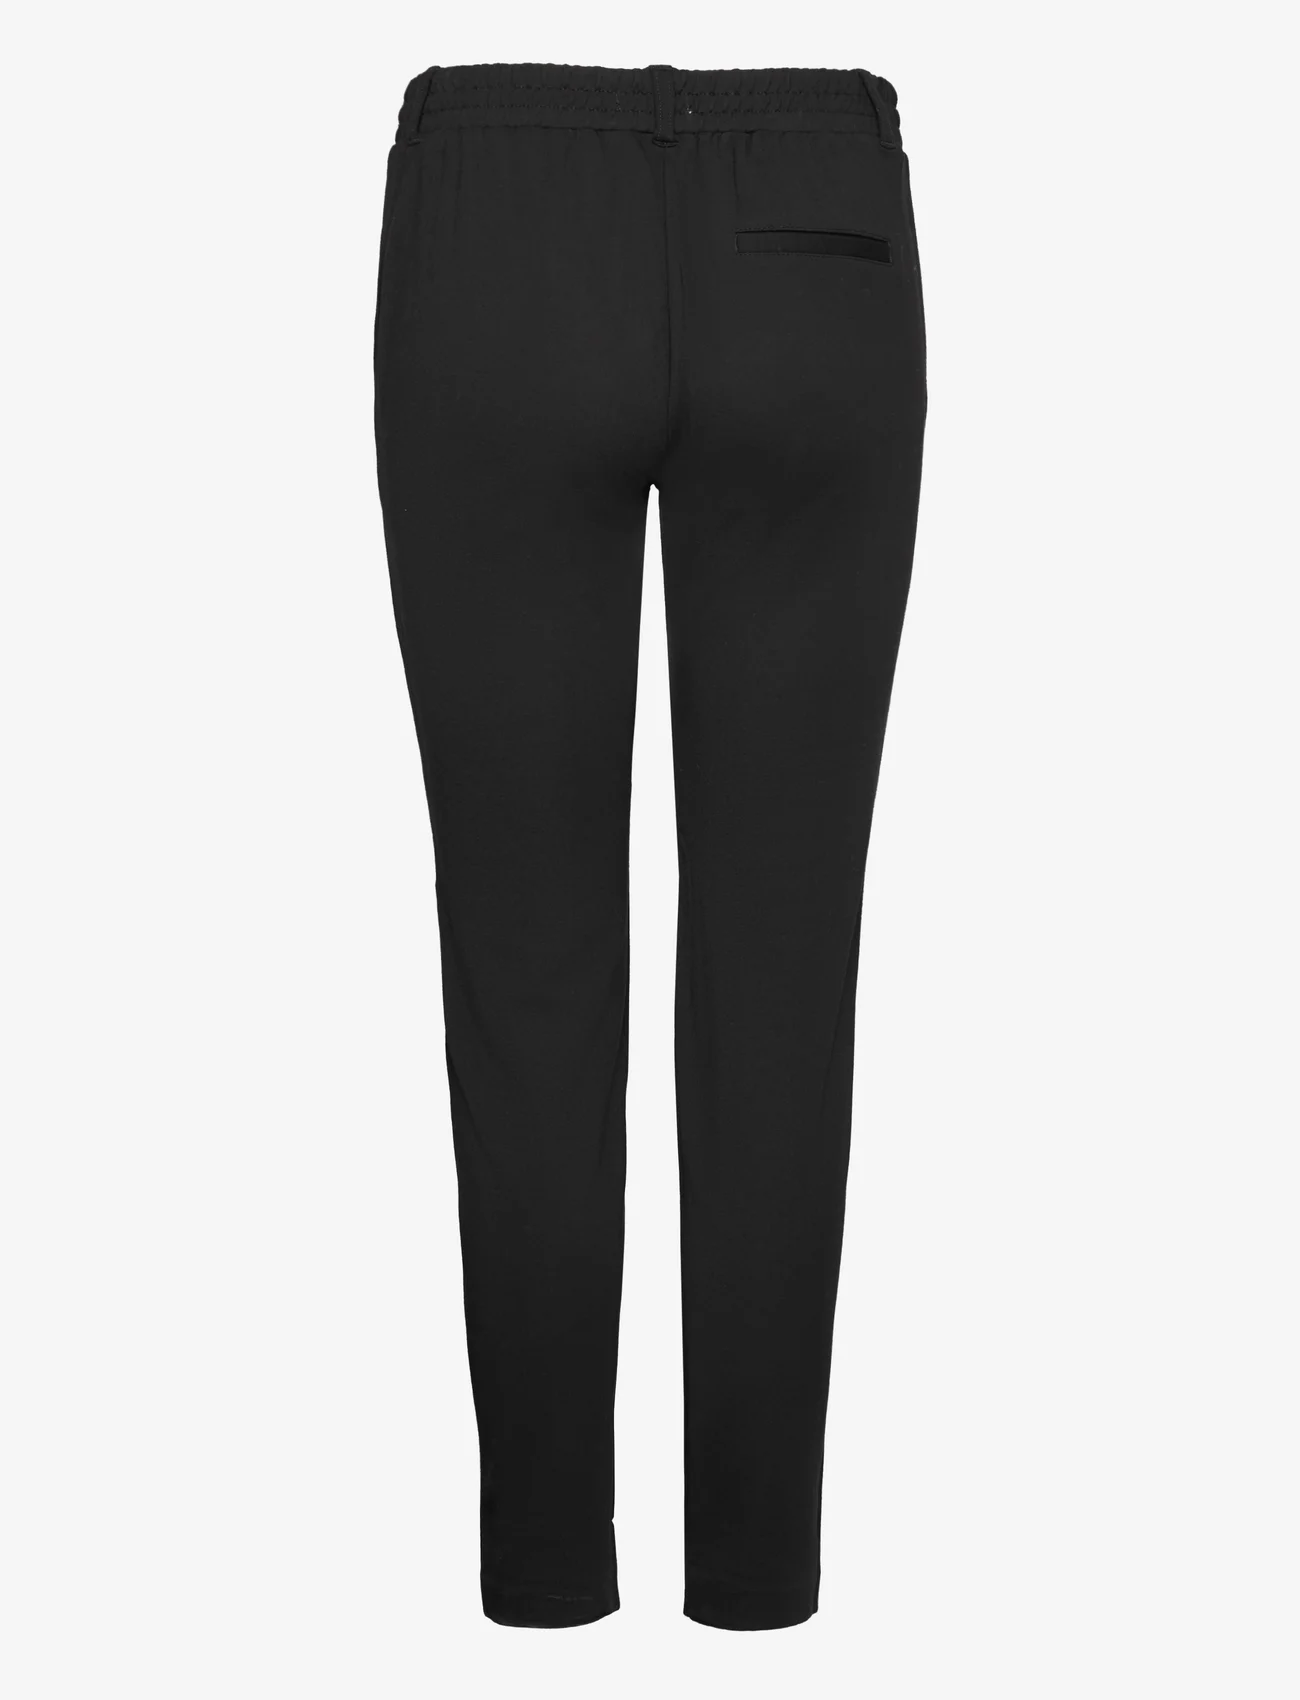 Tom Tailor - jersey loose fit pants ankle - straight leg trousers - deep black - 1